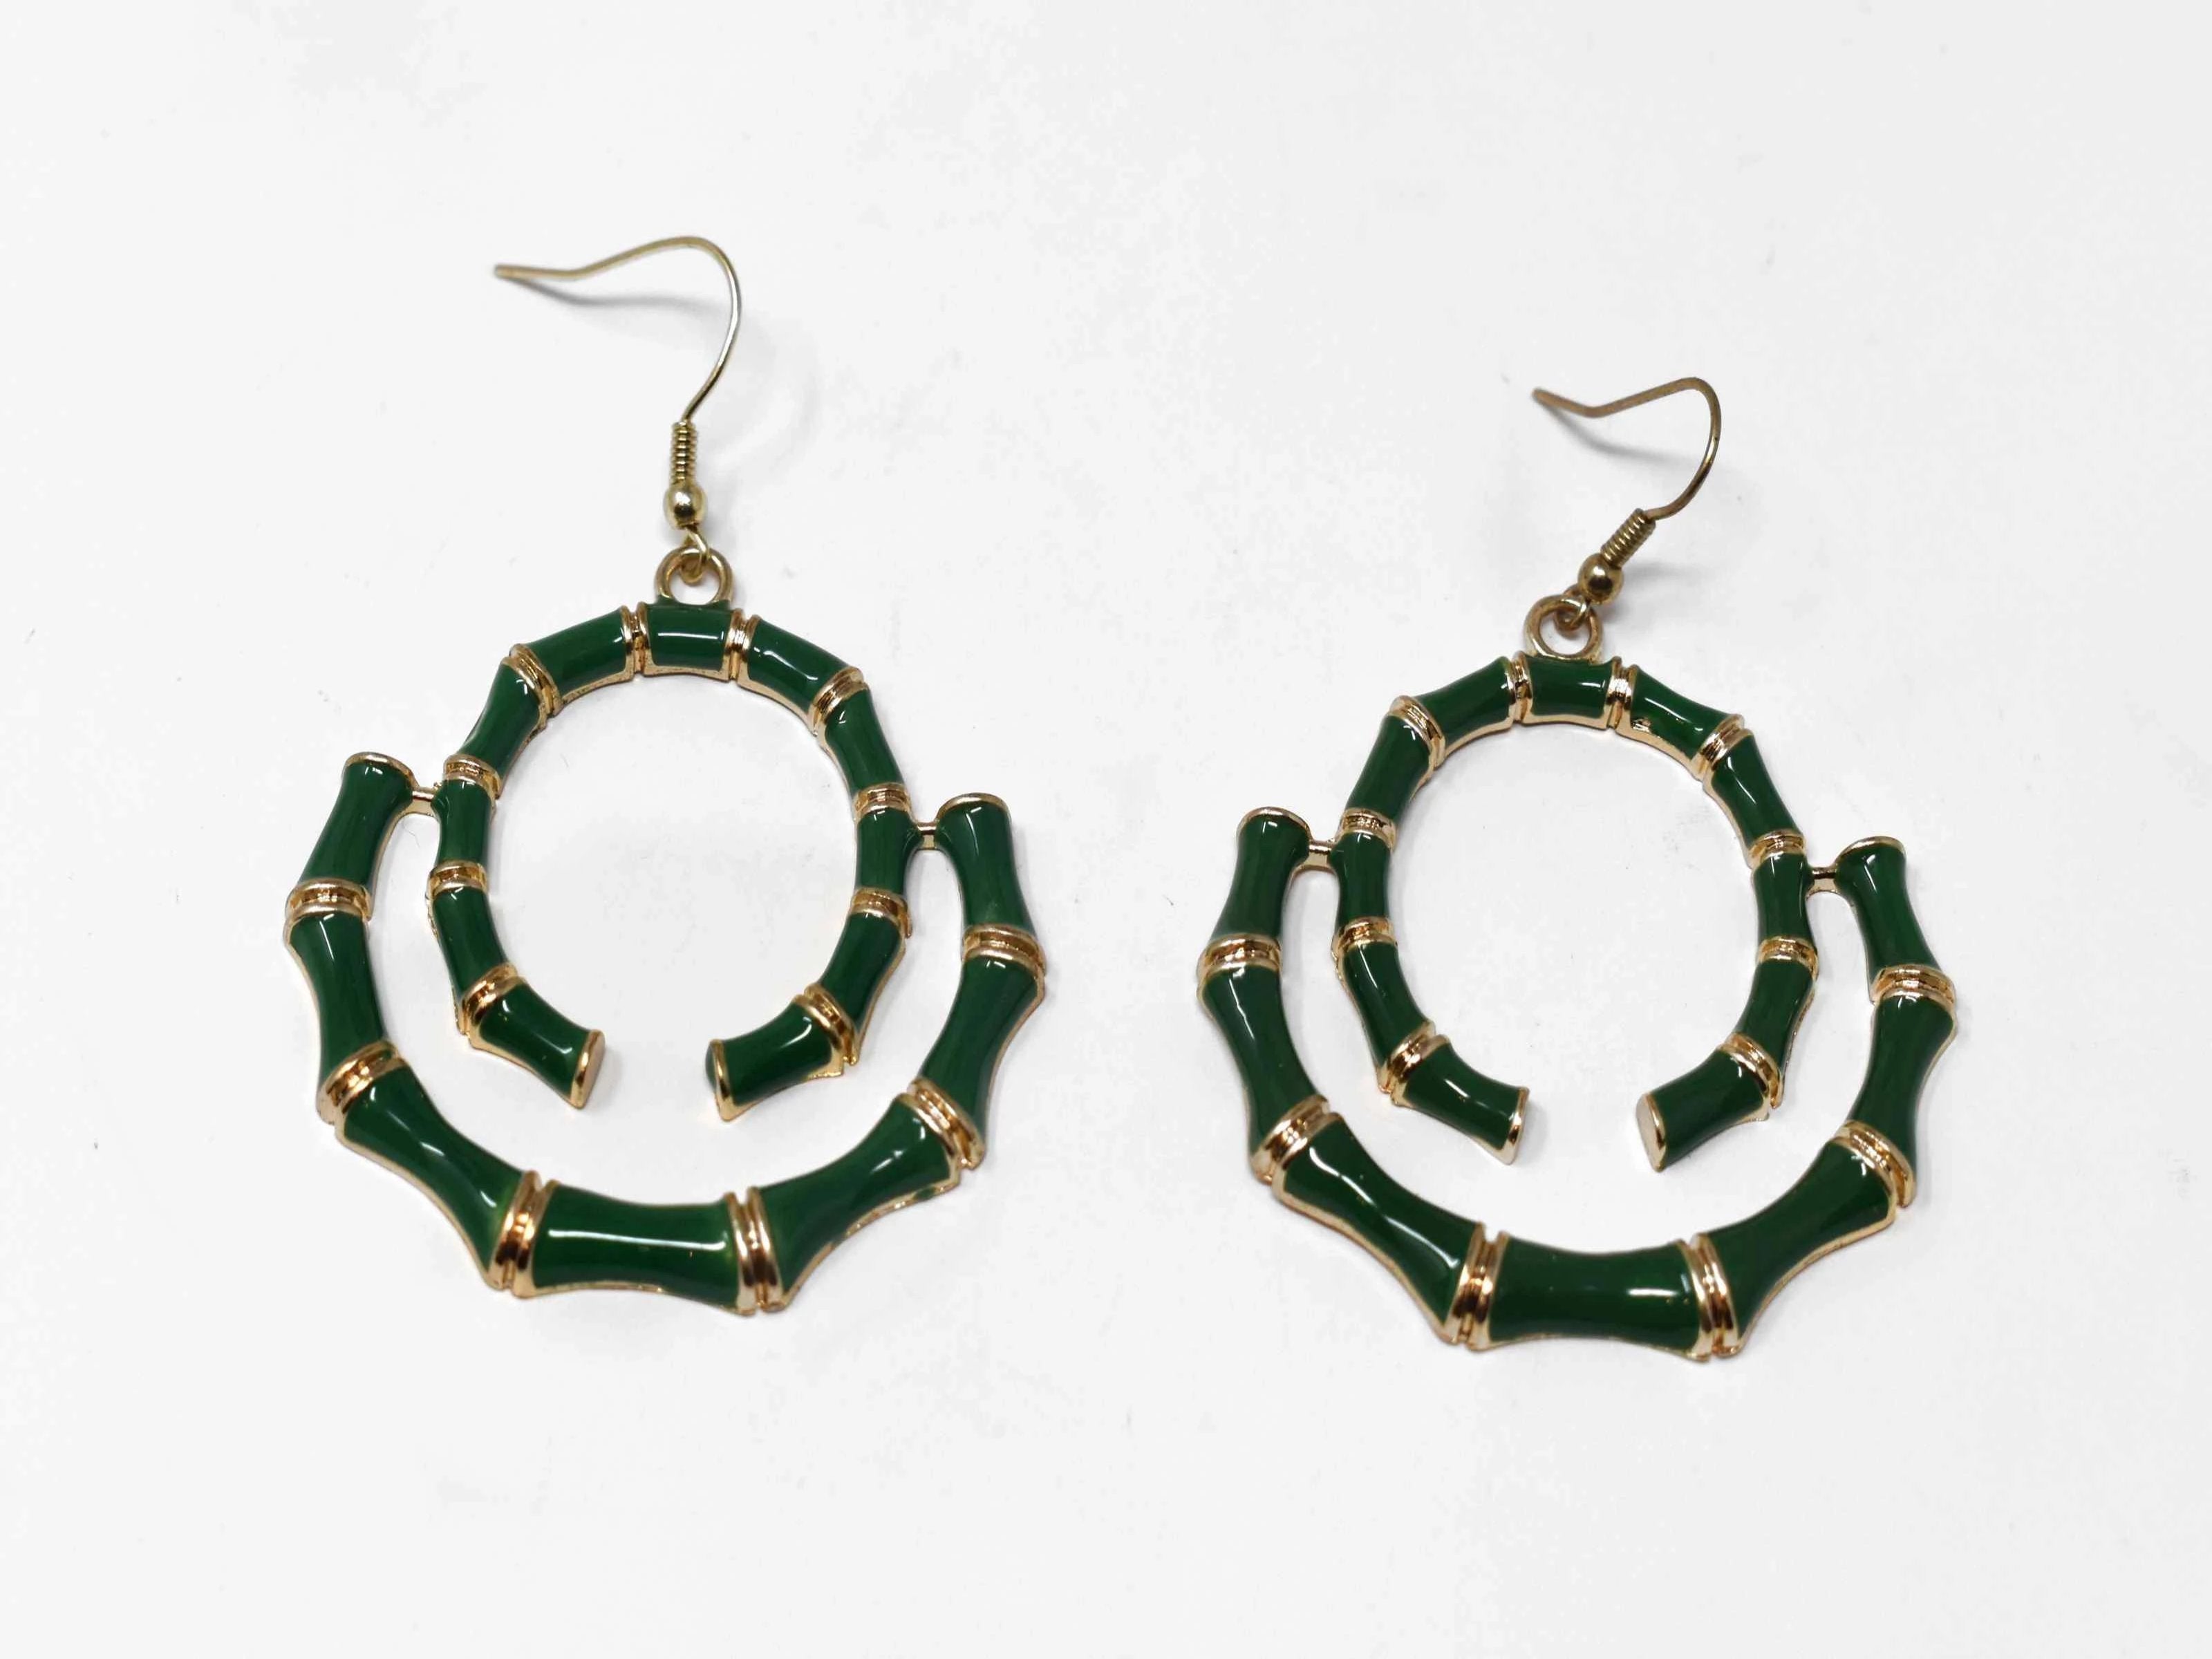 Our Bombays carved bamboo style earrings with a fish hook clasp is gold in tone and green in color. It has a swirled bamboo design measuring 2 1/2" inches in length. 